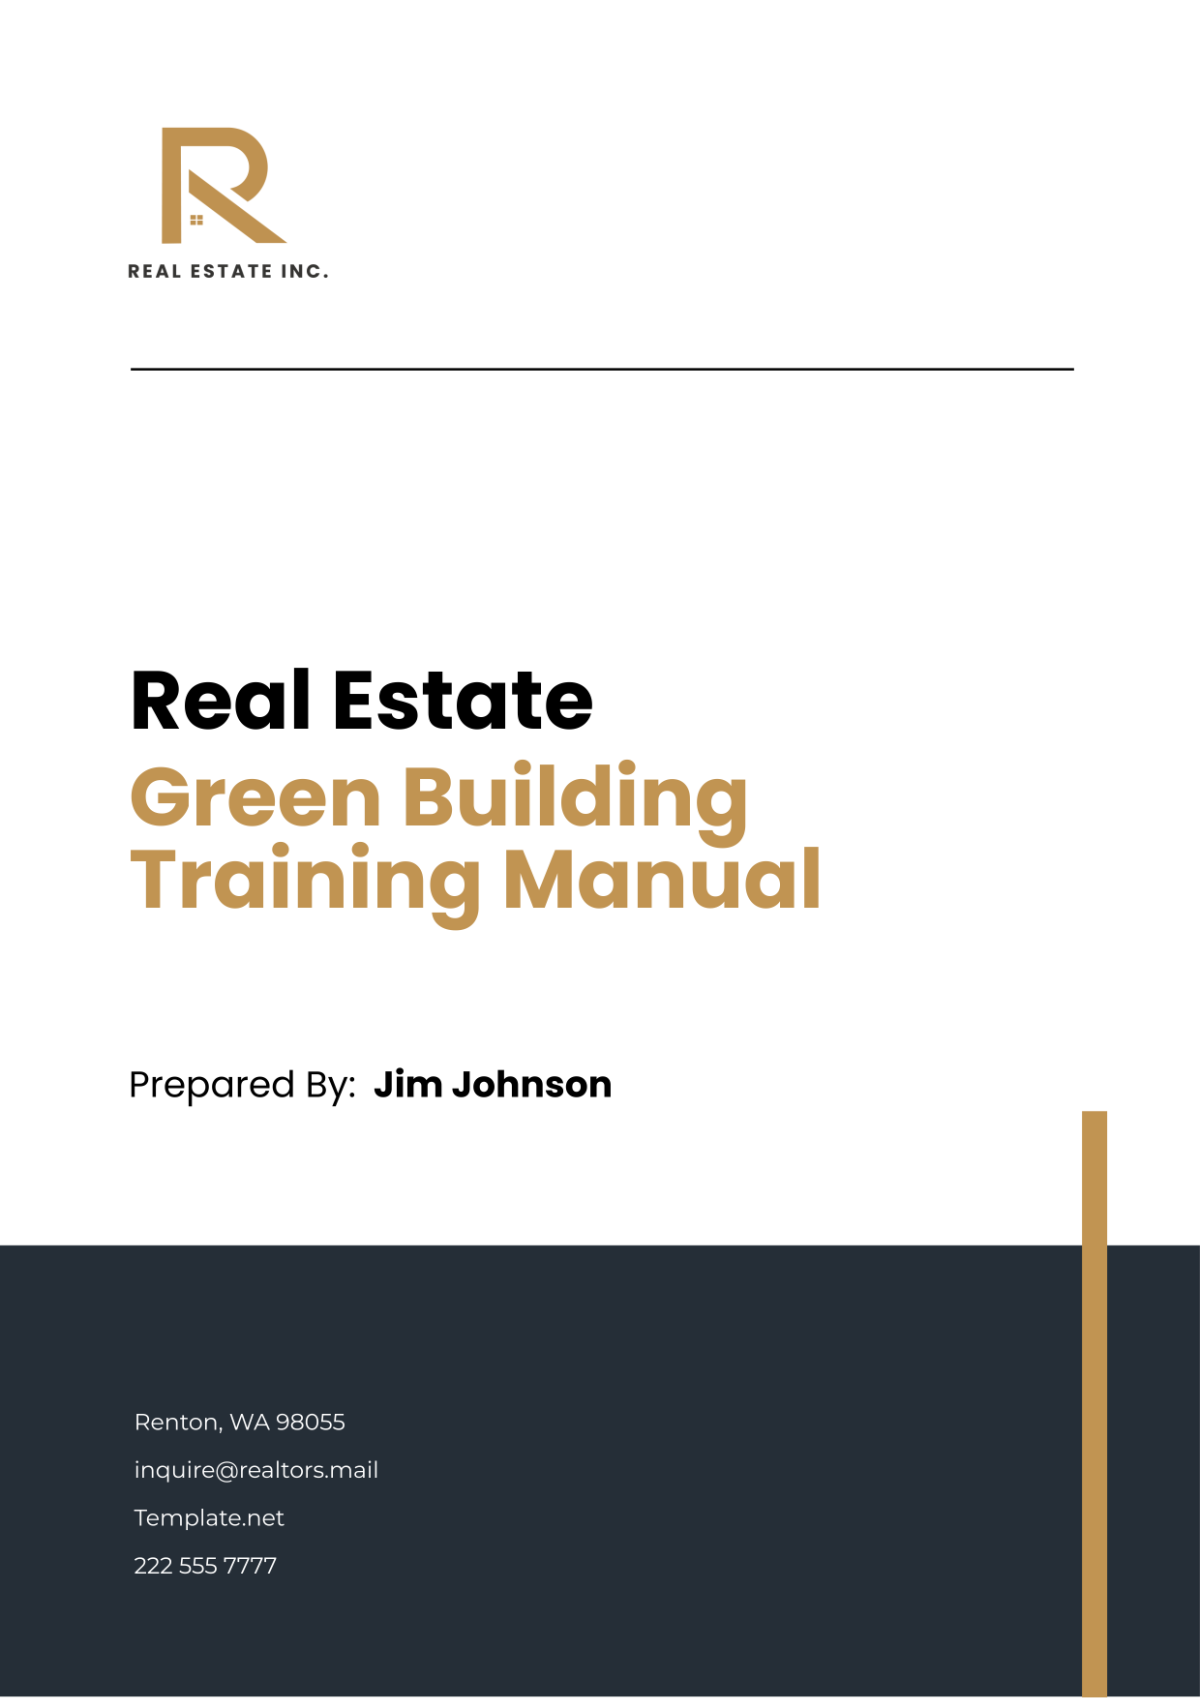 Real Estate Green Building Training Manual Template